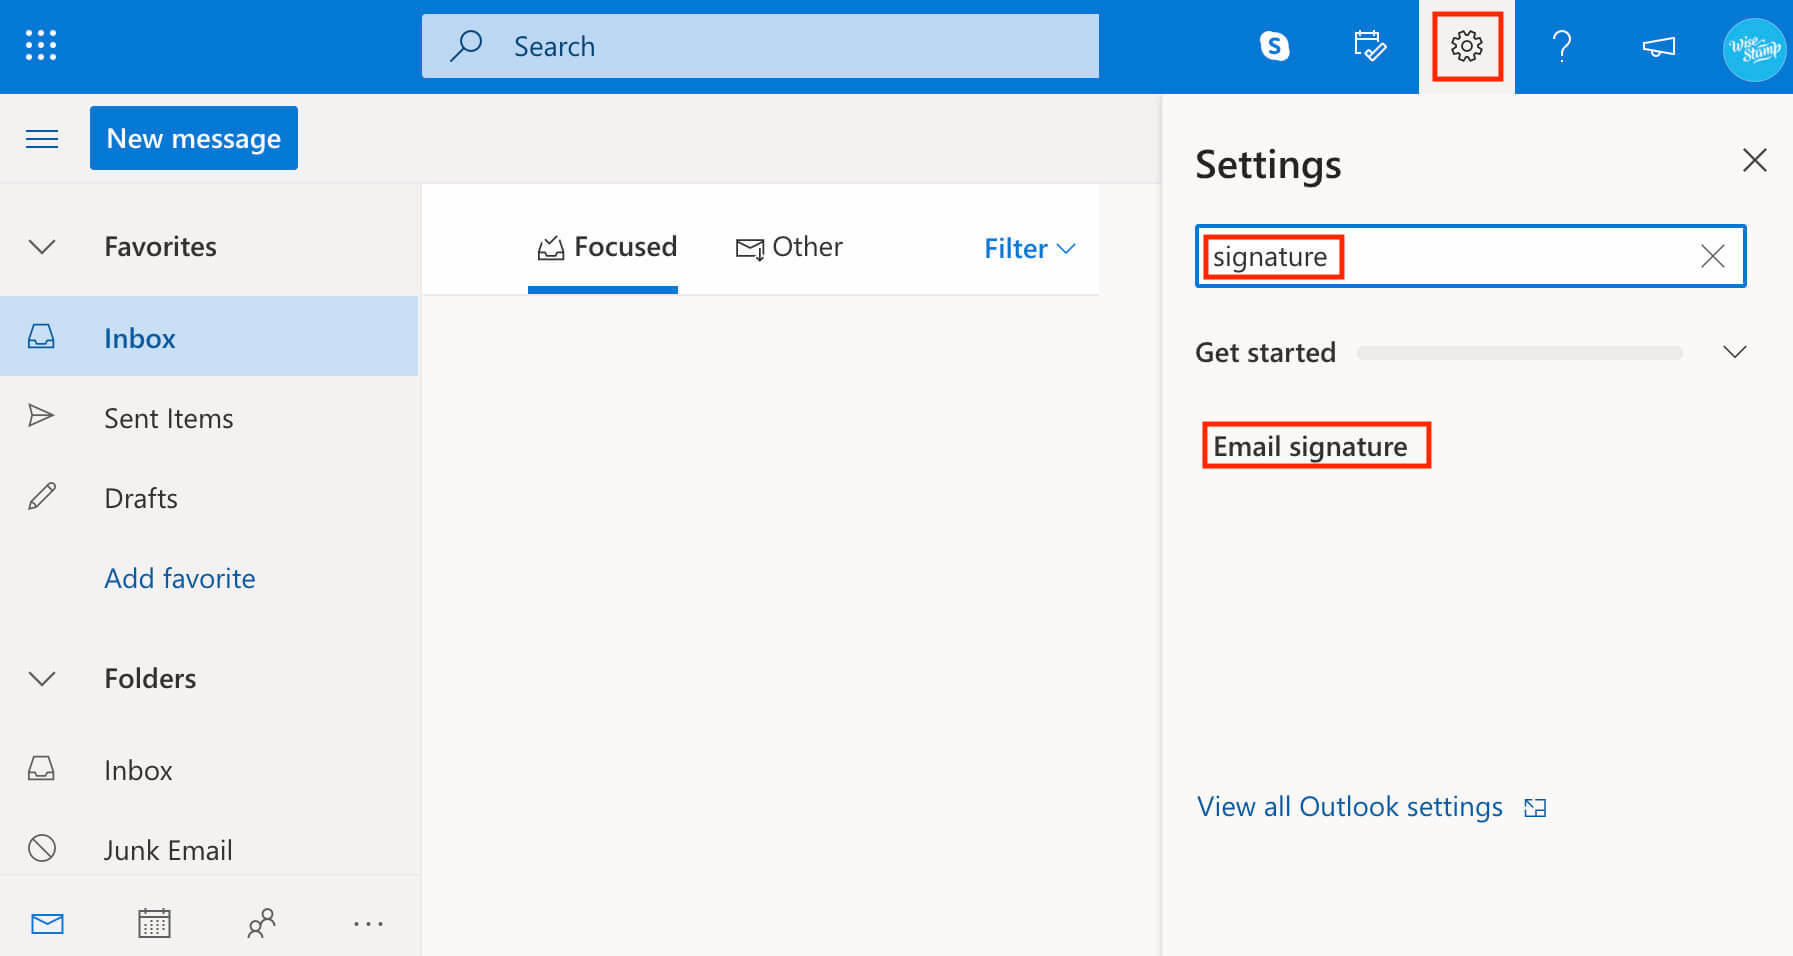 how to add Outlook email signature in 365 and Outlook web app (OWA) - search settings